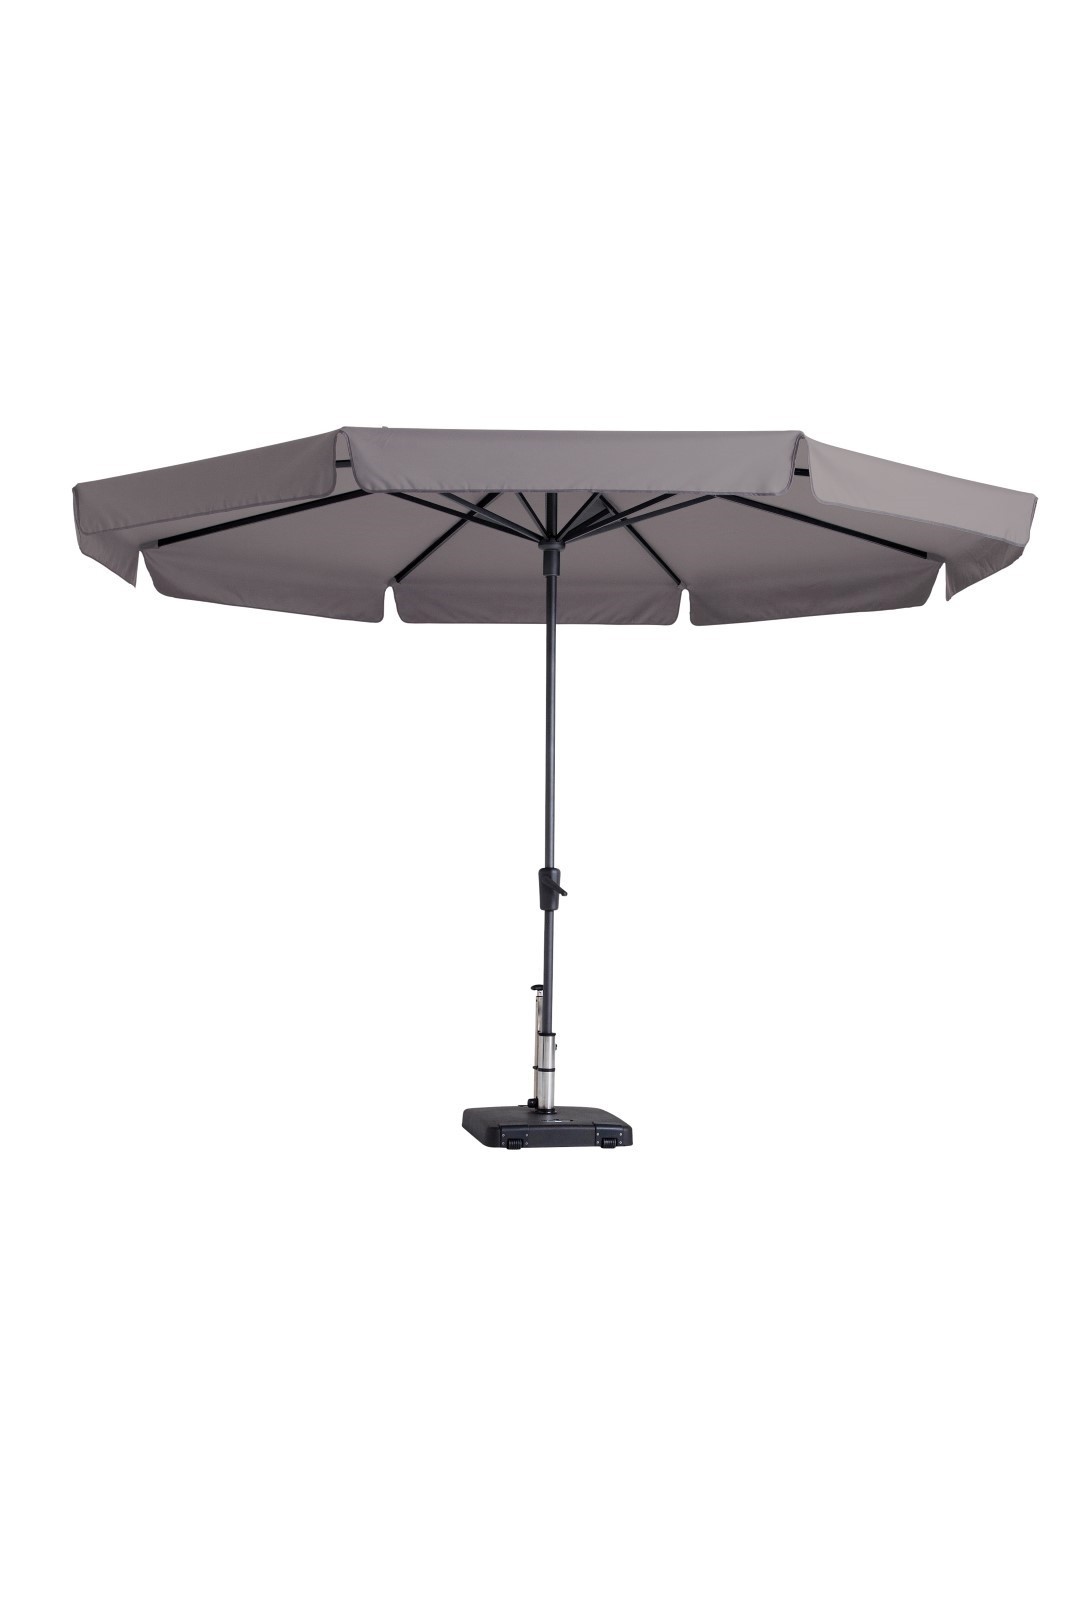 https://www.warentuin.nl/media/catalog/product/S/C/SCAN8713229247638_madison_parasol_syros_luxe_350_cm_polyester_taupe_madison_7fca.jpg